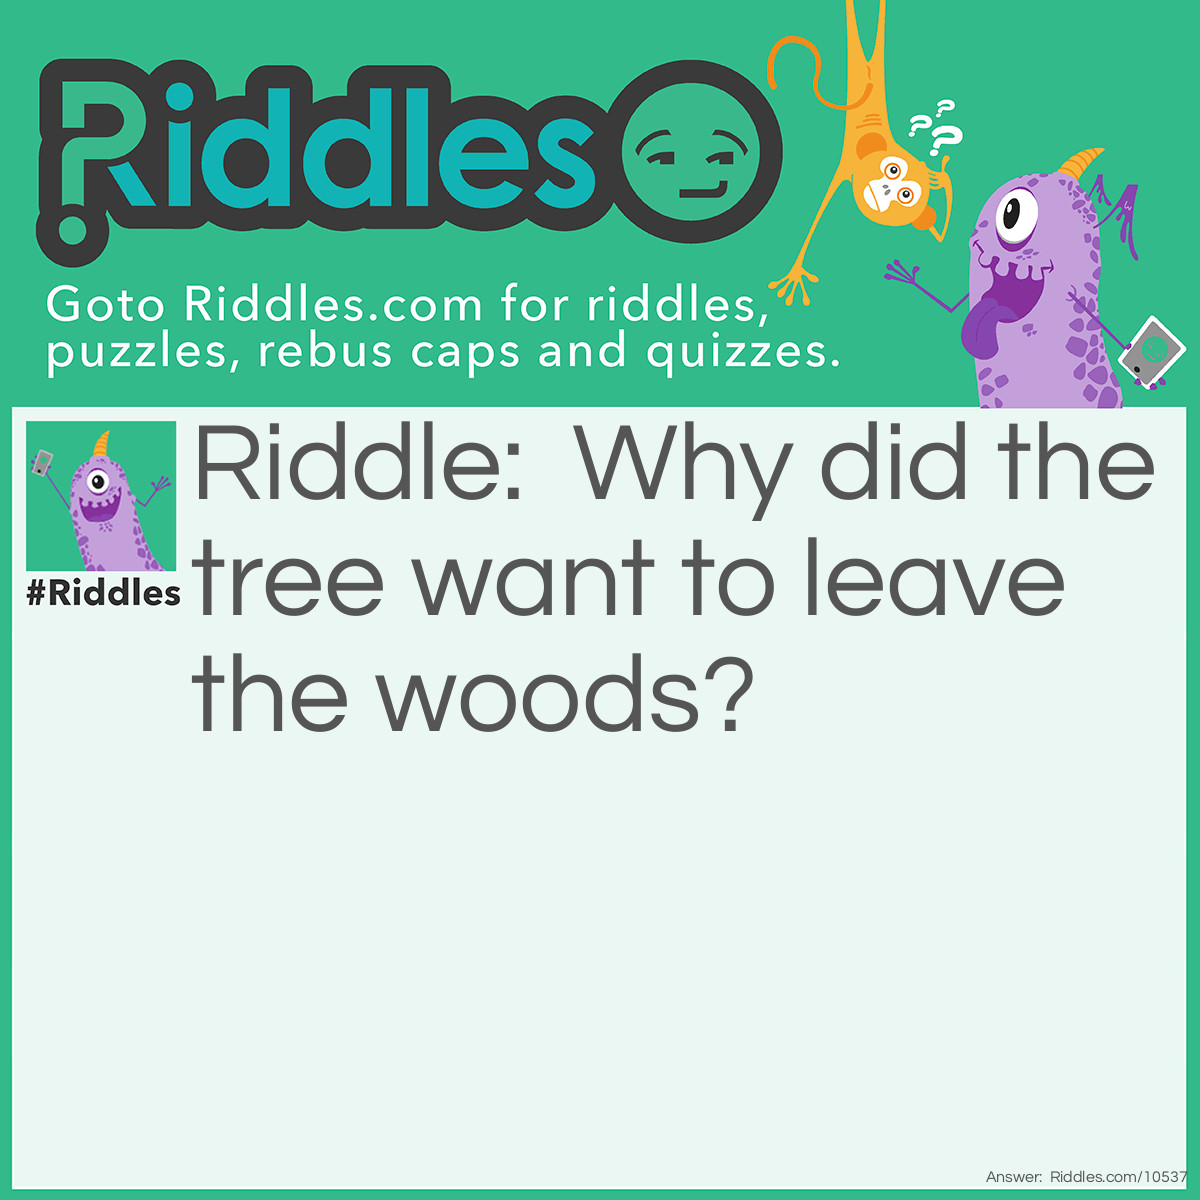 Riddle: Why did the tree want to leave the woods? Answer: Wanted to branch out.